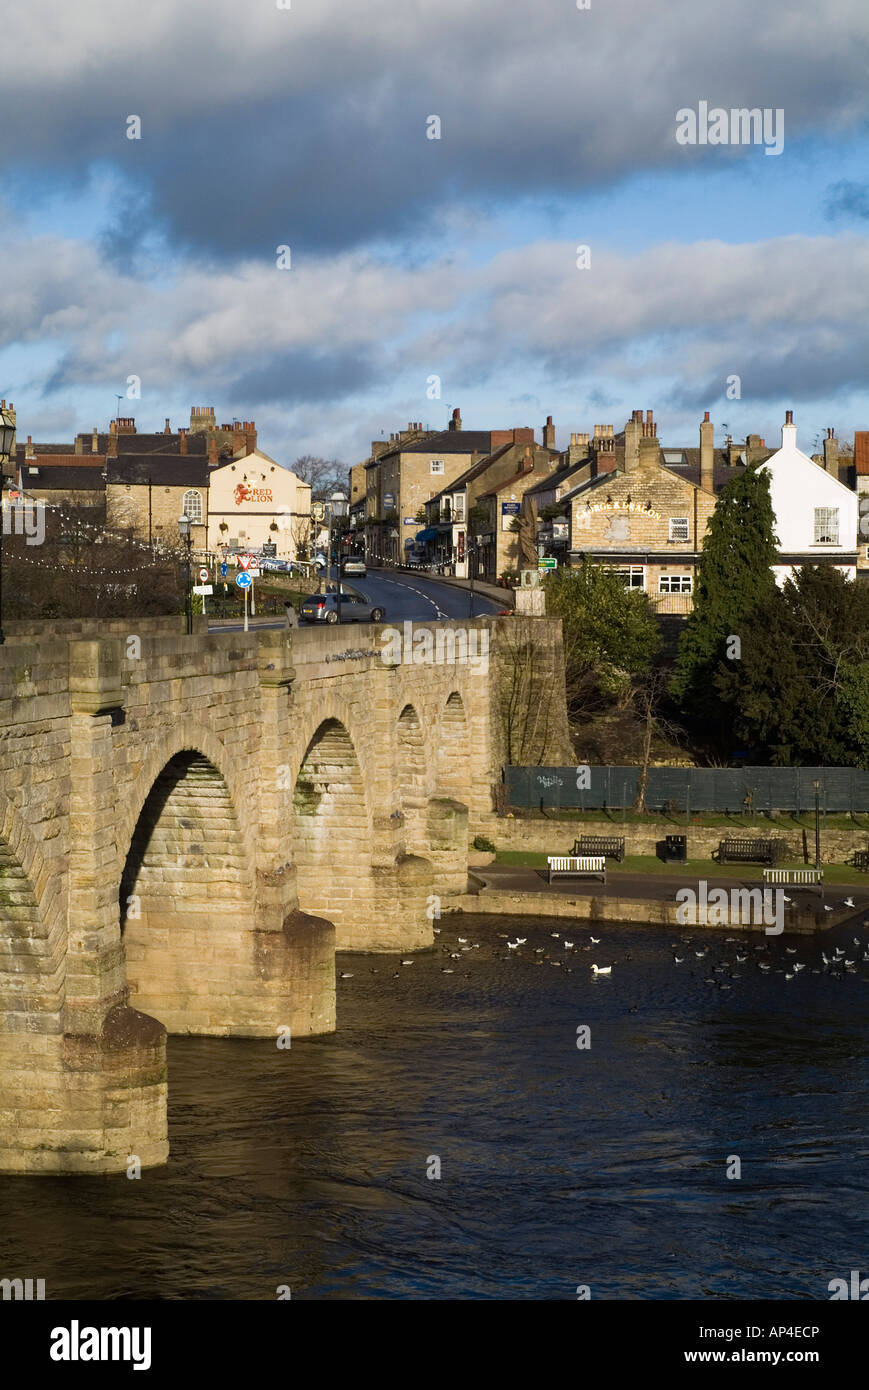 dh River Wharfe WETHERBY WEST YORKSHIRE Small rural town Bridge over rivers uk gb bridges Stock Photo